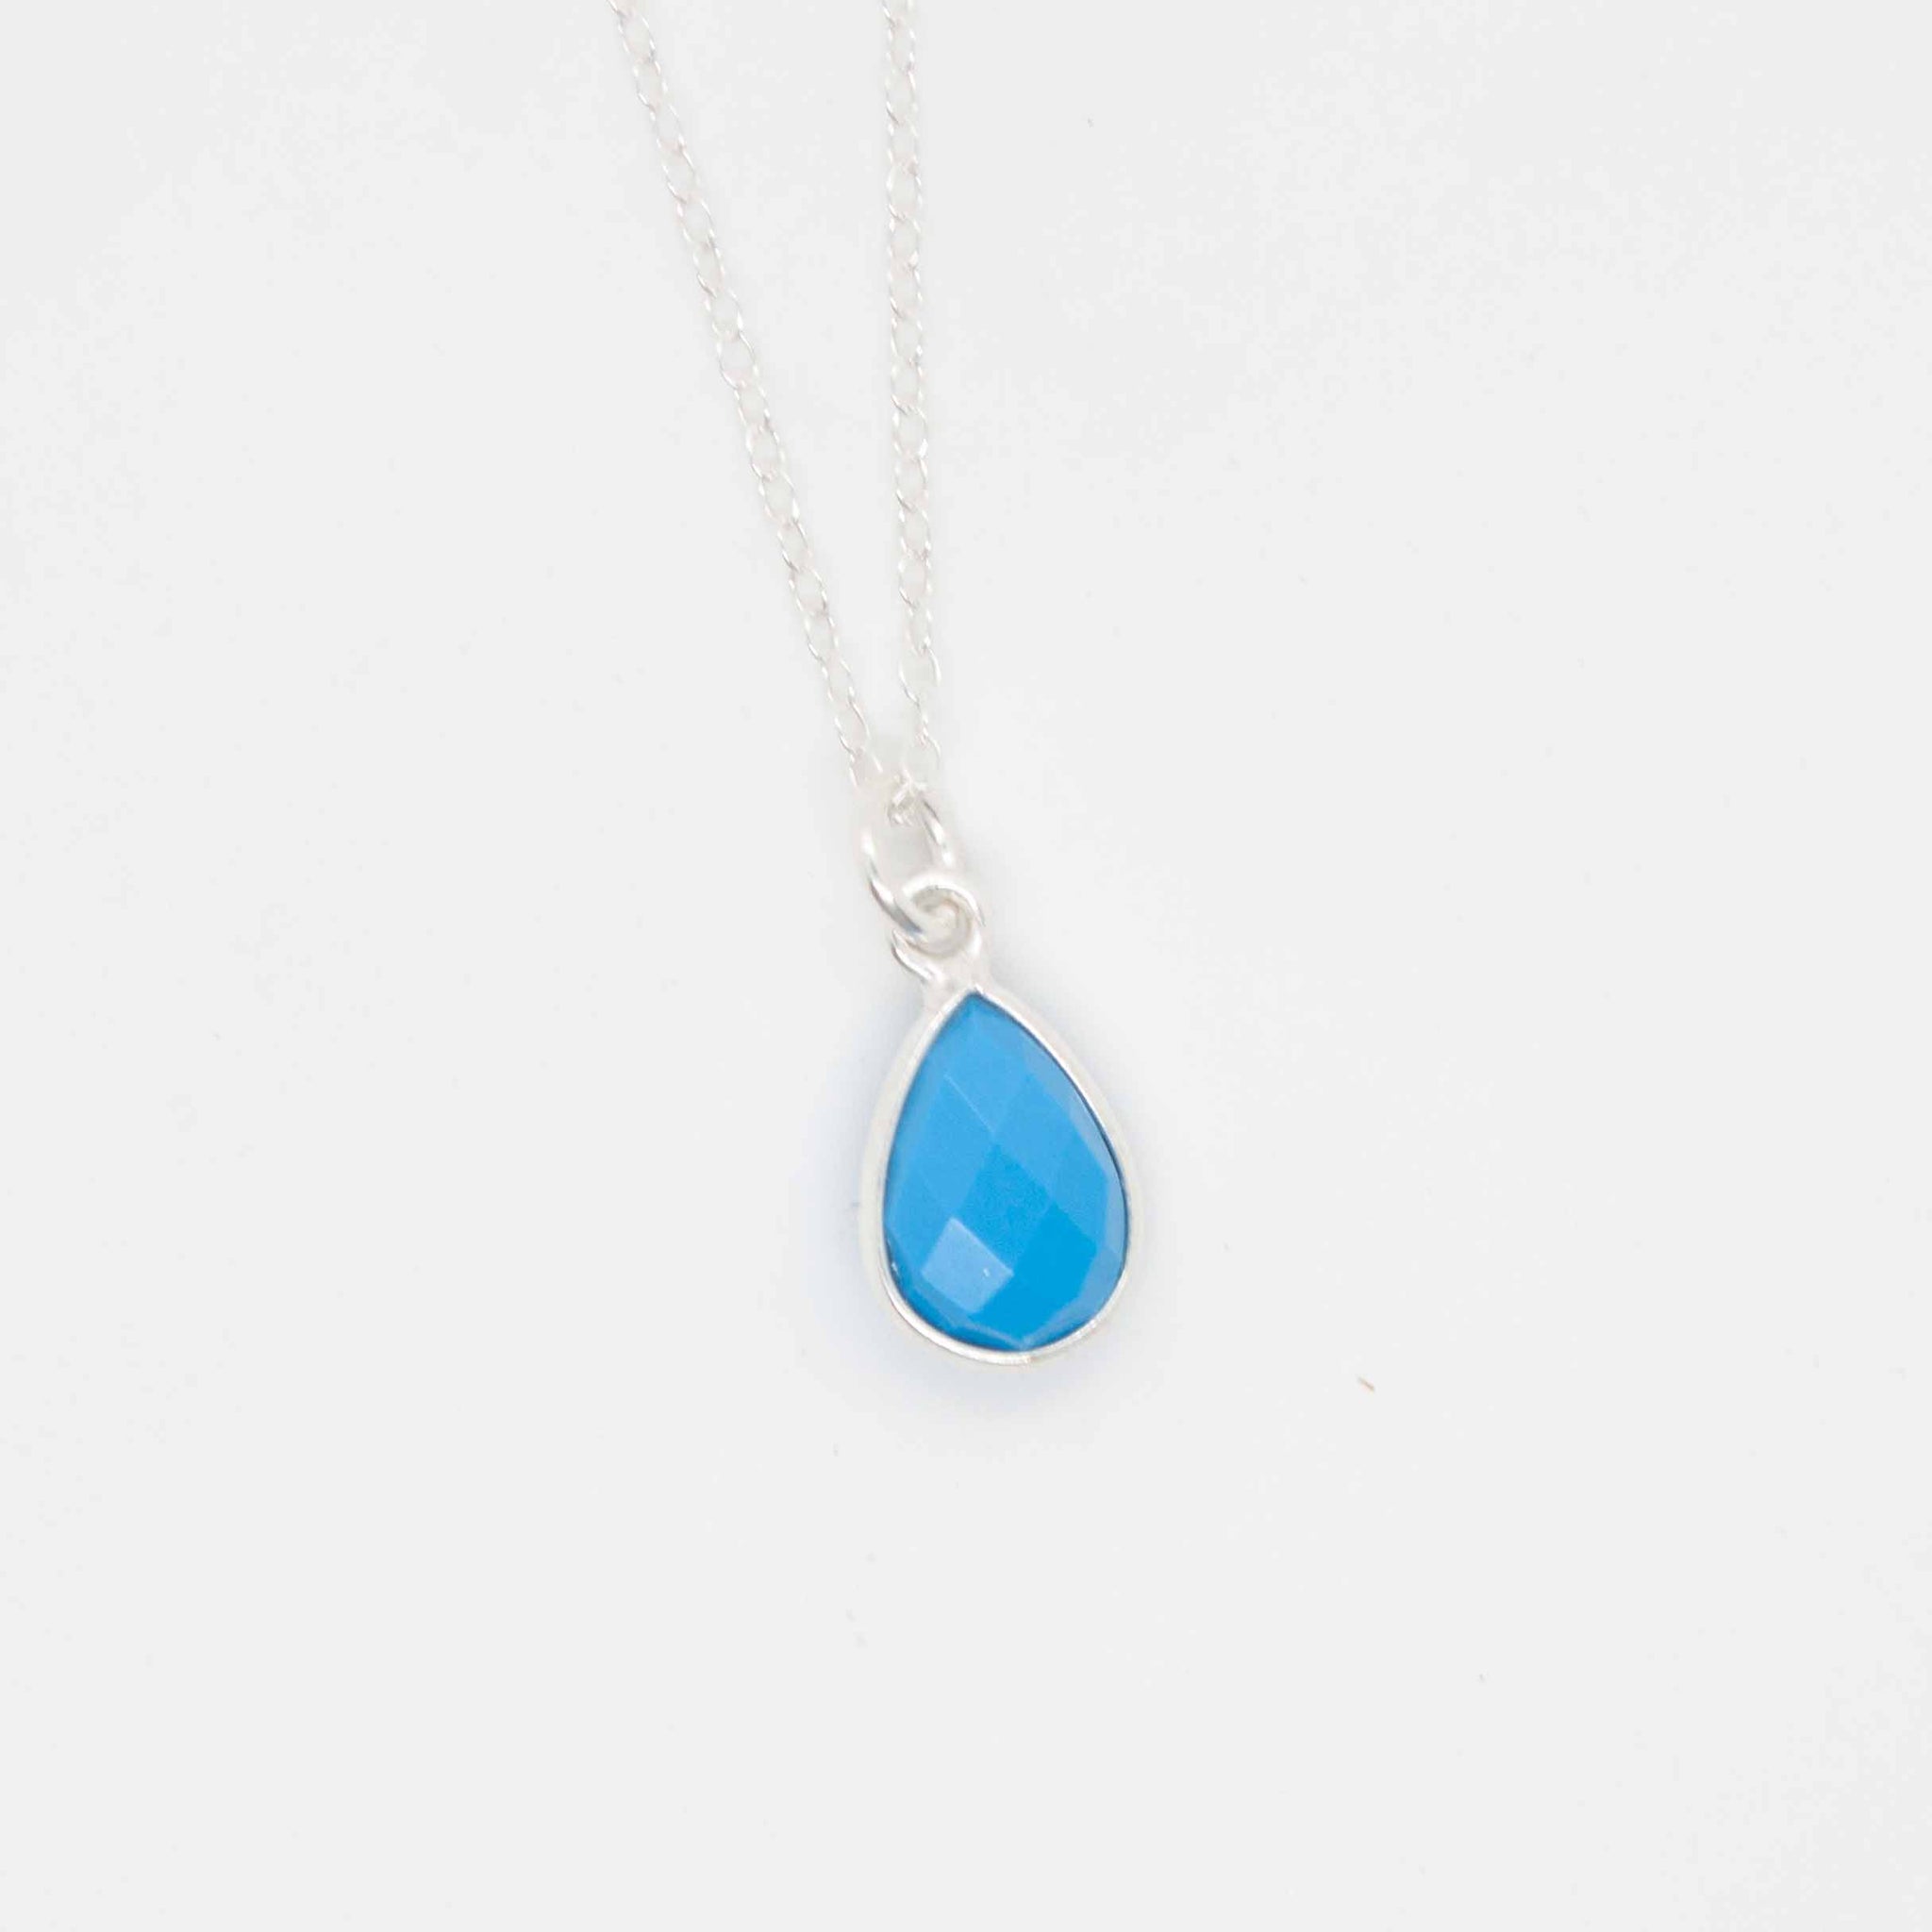 Great for an everyday pop of colour, treat yourself to this dainty and vibrant turquoise and silver drop necklace. synthetic* turquoise beads with sterling silver bezel & chain. Handmade in Toronto by kp jewelry co. *synthetic turquoise is a cost-efficient and sustainable alternative to the real thing.